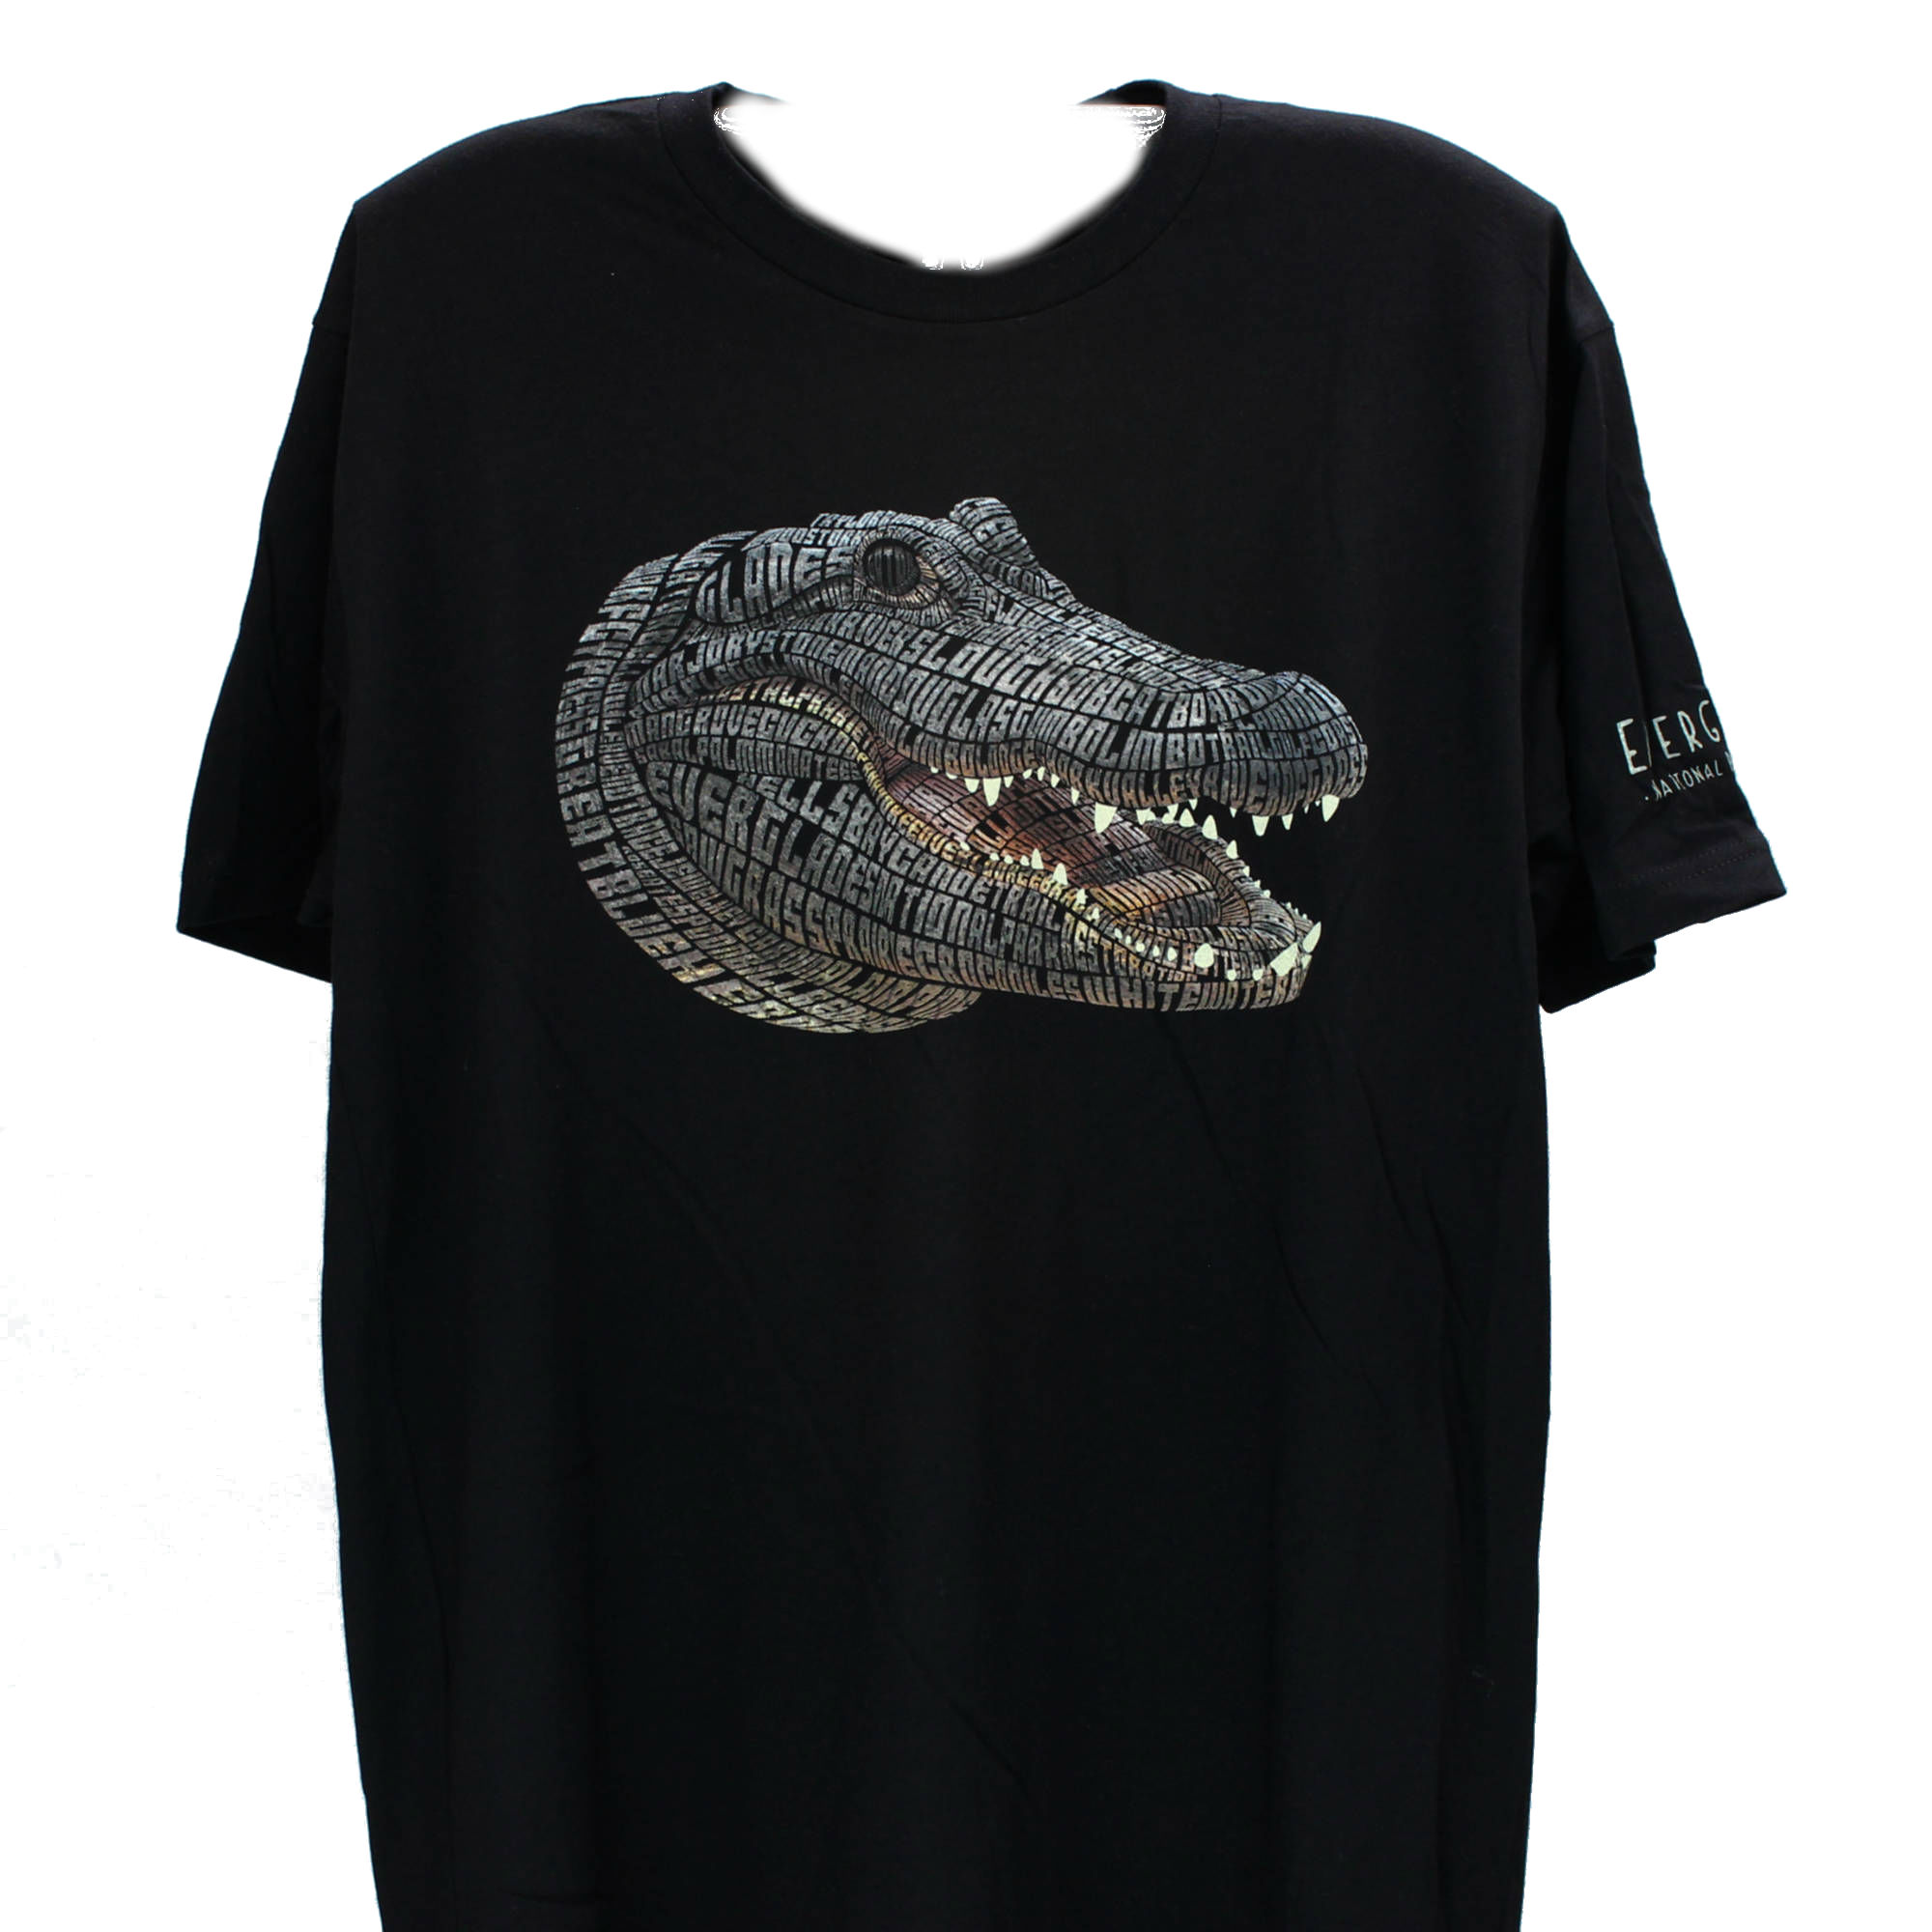 shirt with alligator on it